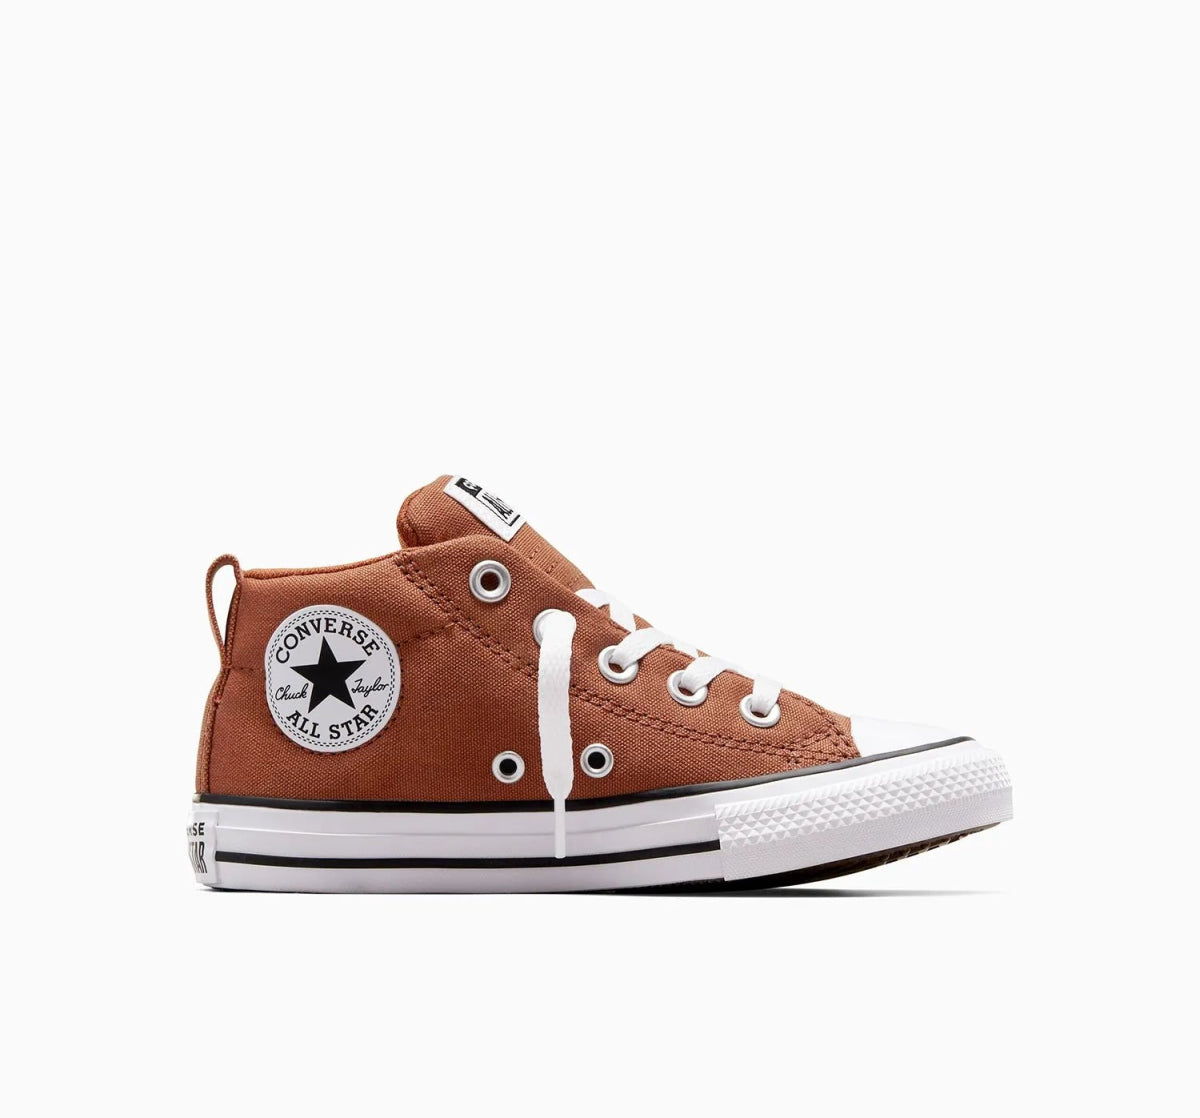 Converse Men's Chuck Taylor All Star Malden Street Mid Brown Shoes Sneakers  New